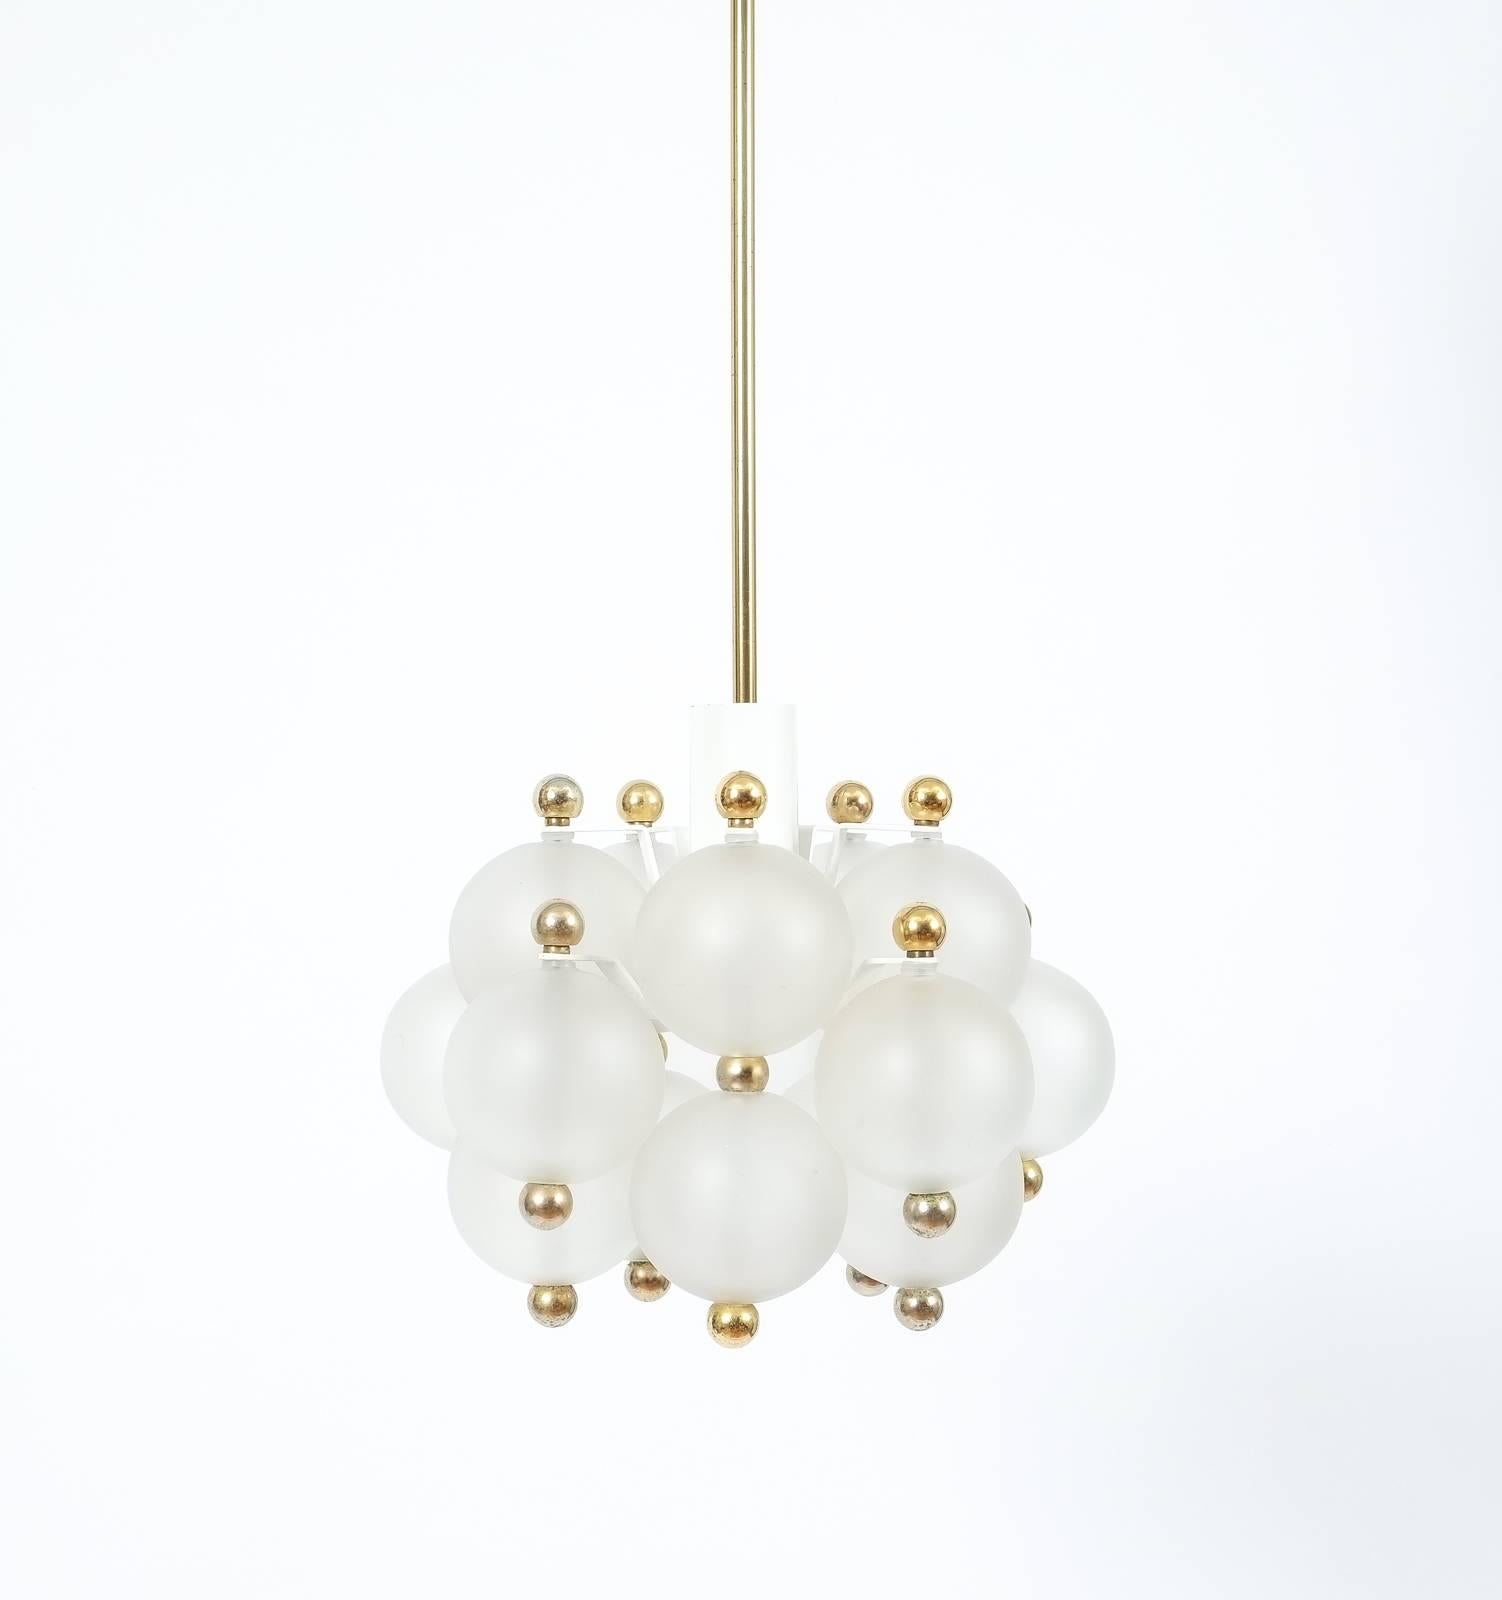 Satin Glass Chandelier Lamp By Kinkeldey With Gold Knobs, circa 1980 For Sale 1